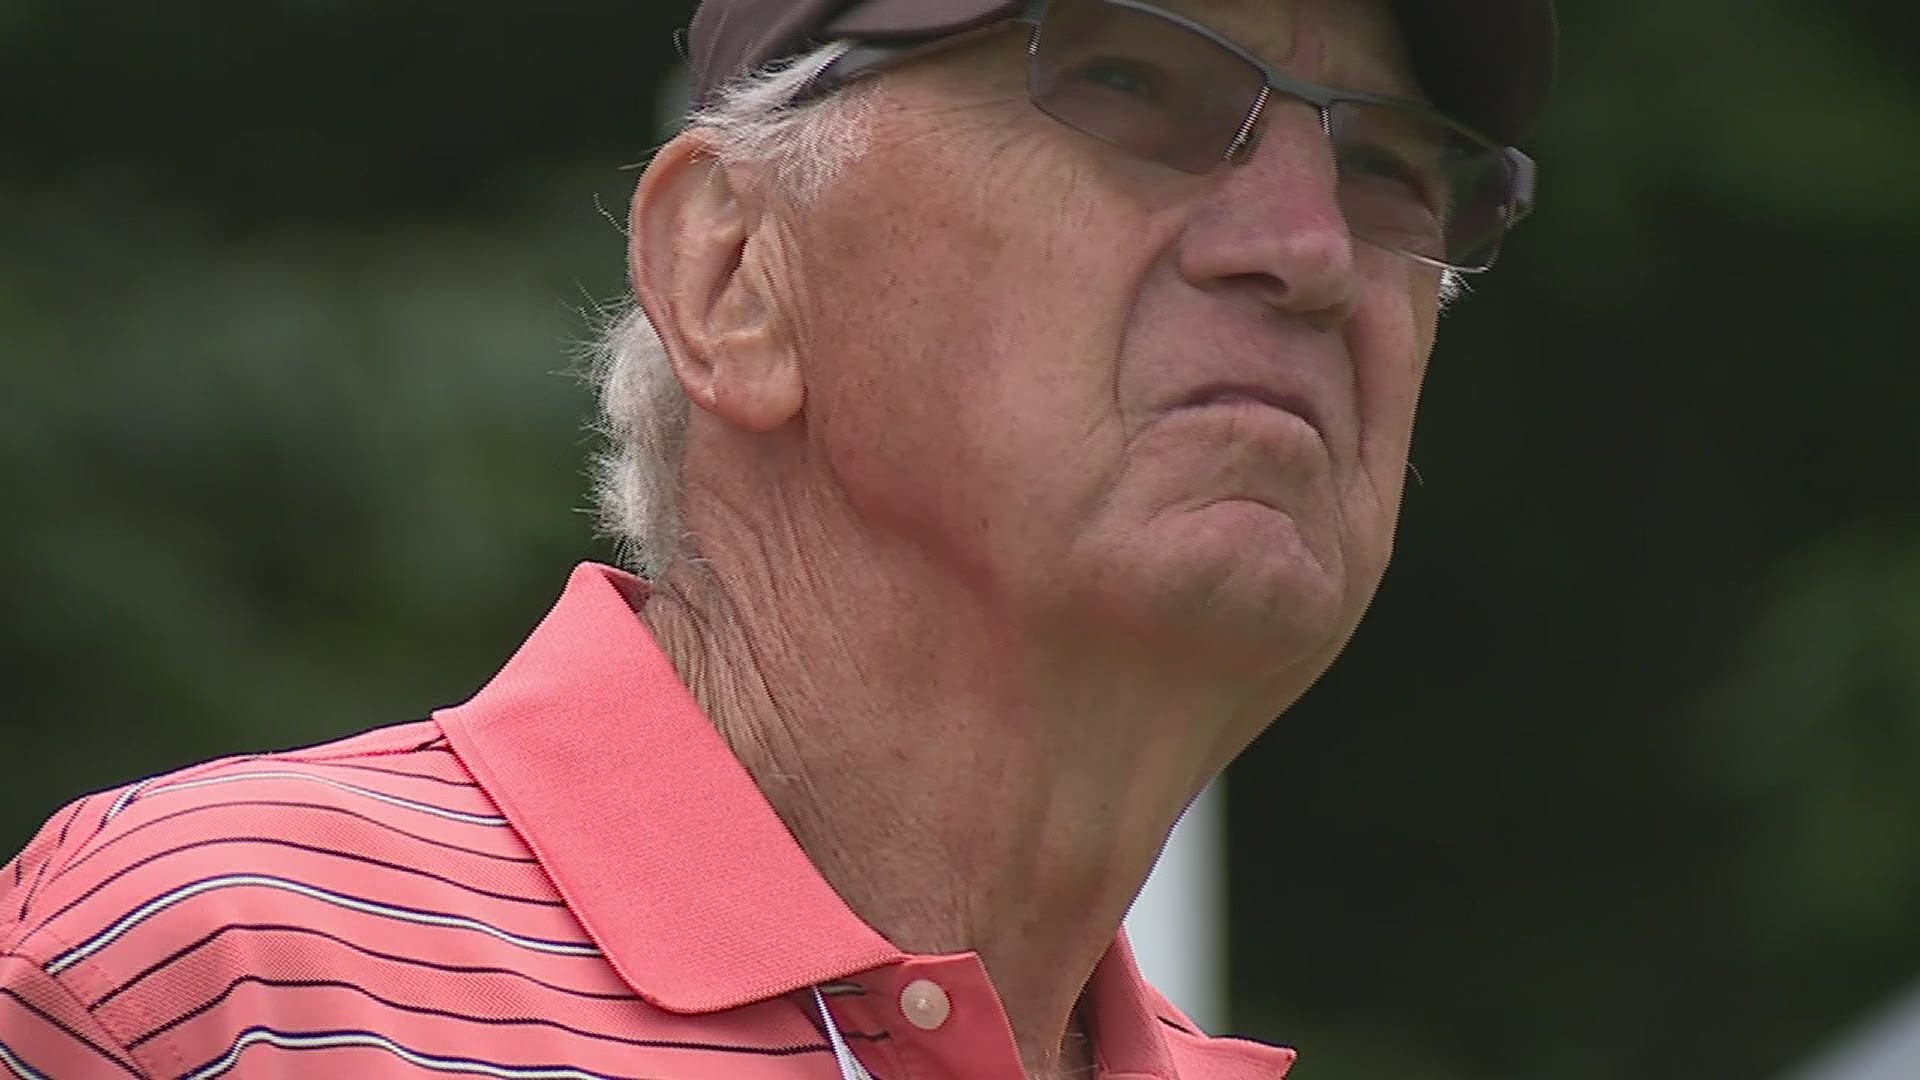 Tom Appelquist has been coming to the big tournament for 50 years. The Rock Island native says at this point - it's just part of who he is.